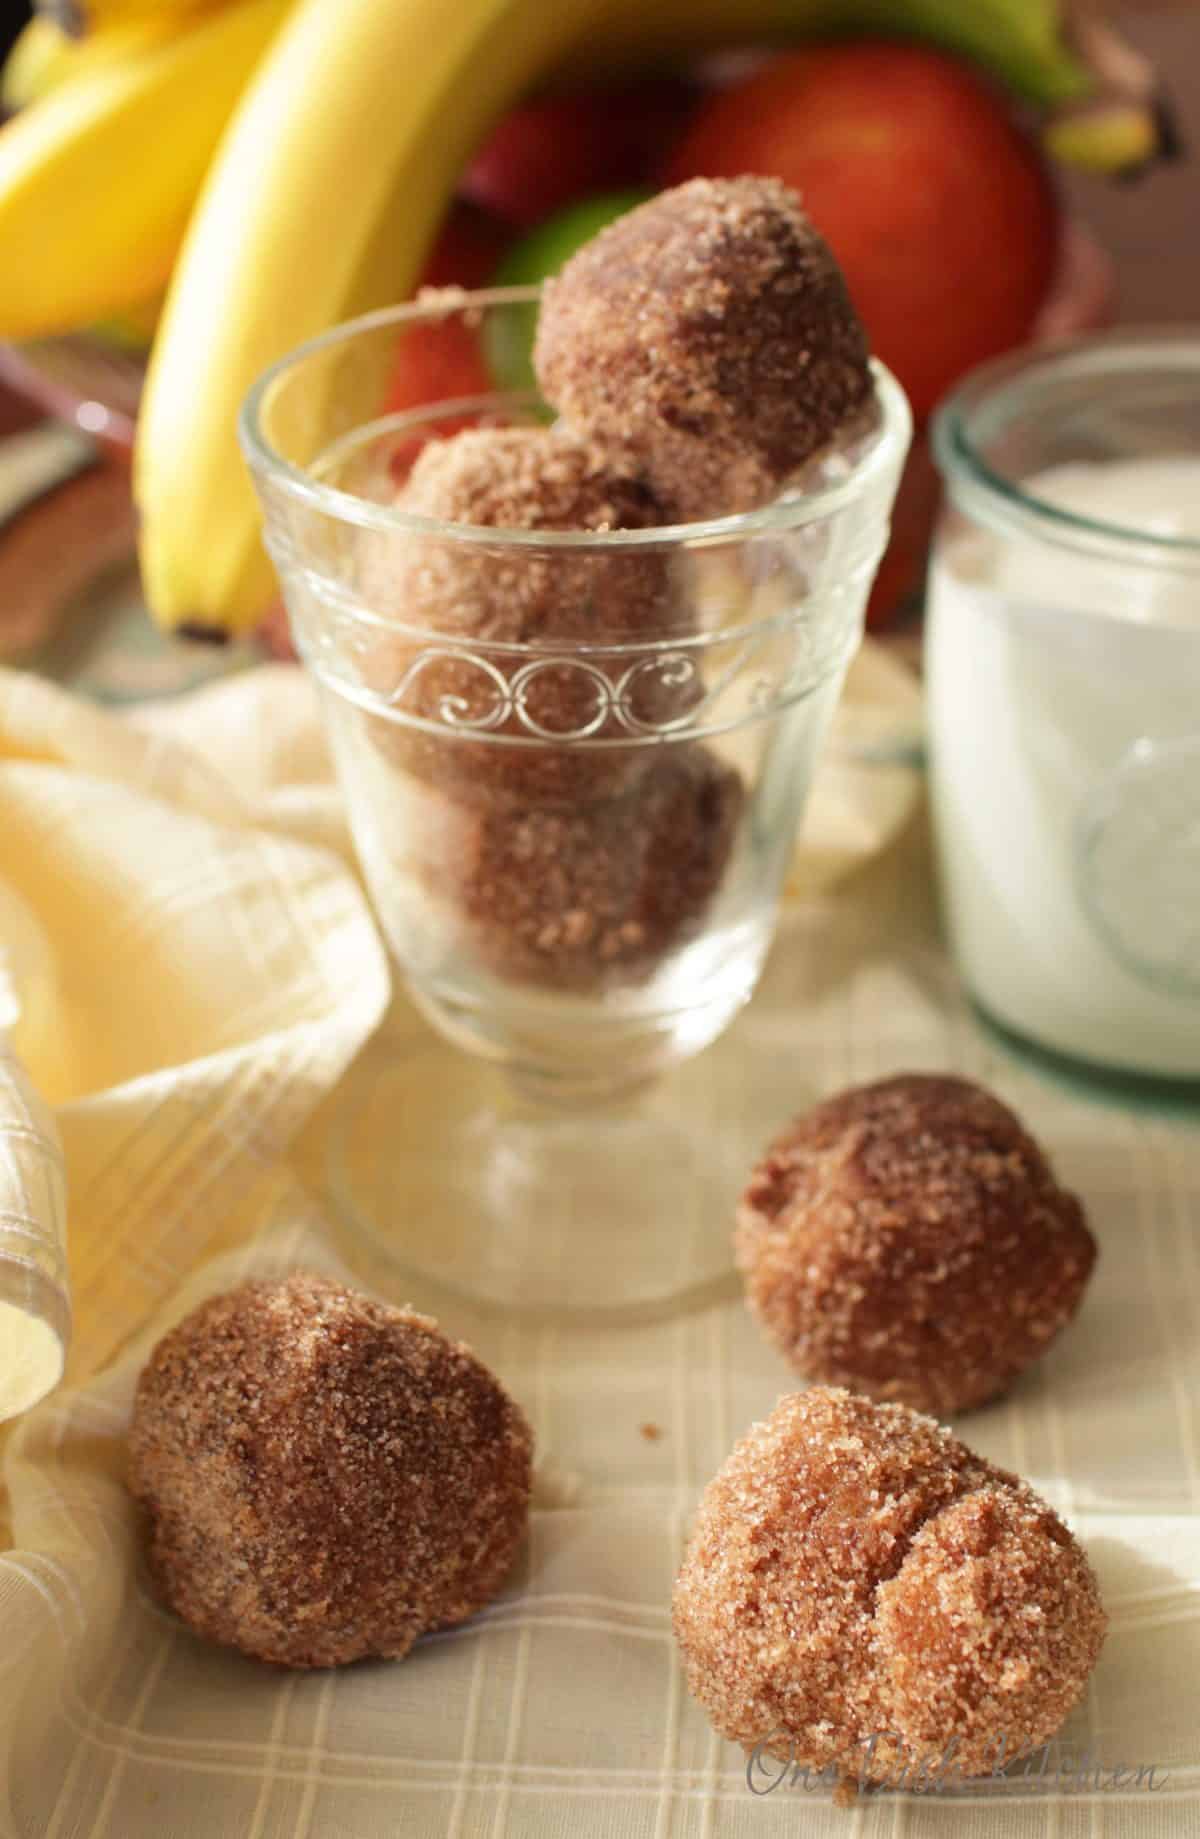 A dessert glass filled with three donut holes next to three donut holes scattered on a cloth napkin all next to a glass of milk